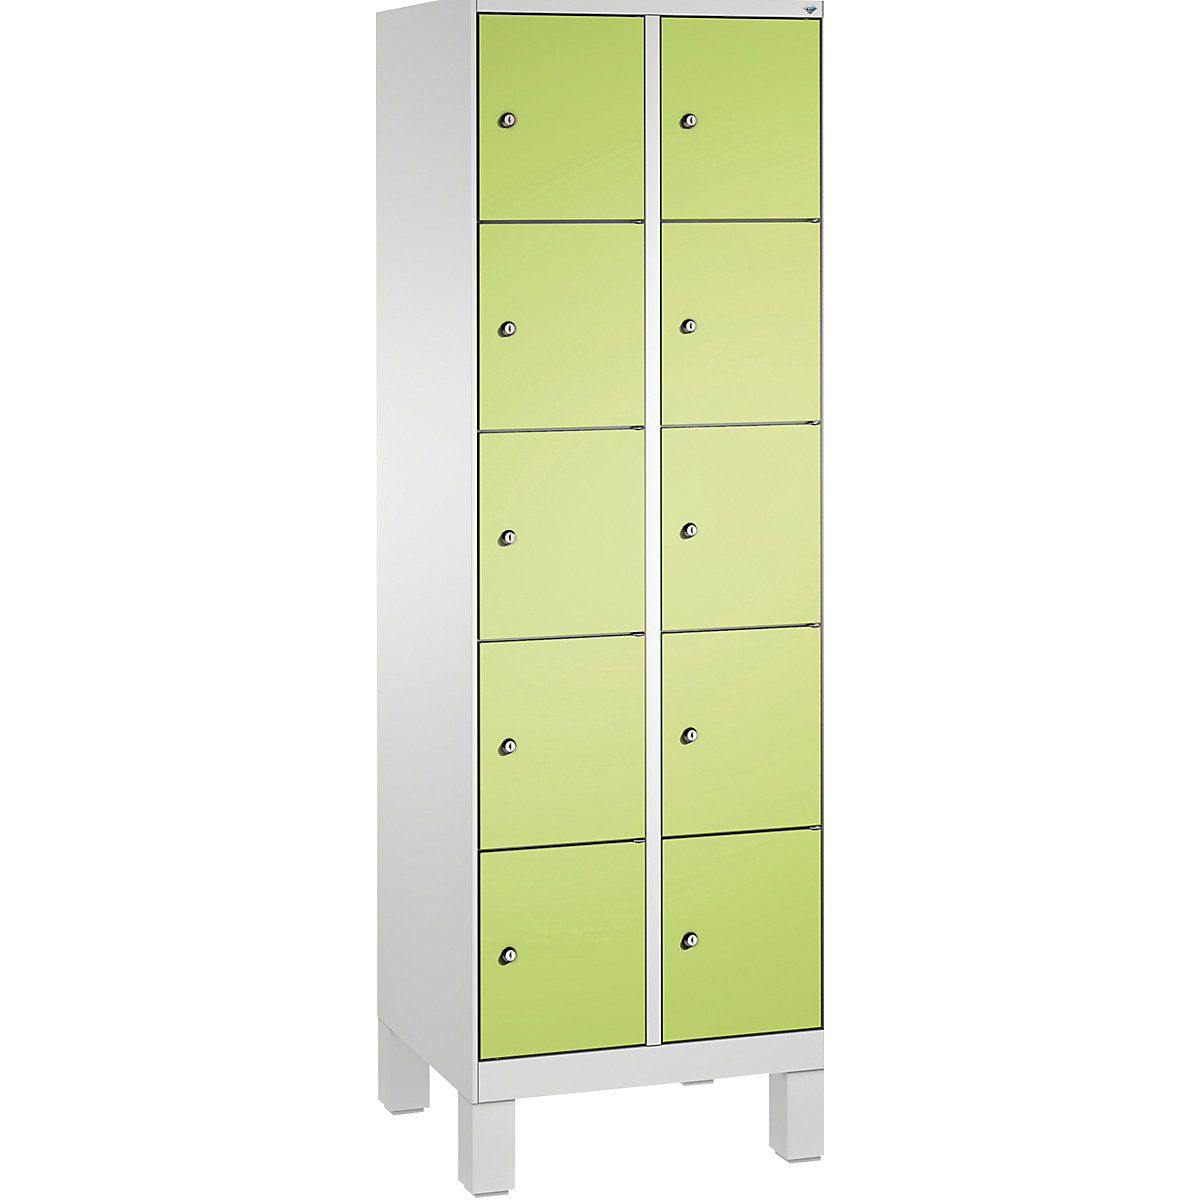 EVOLO locker unit, with feet – C+P, 2 compartments, 5 shelf compartments each, compartment width 300 mm, light grey / viridian green-10